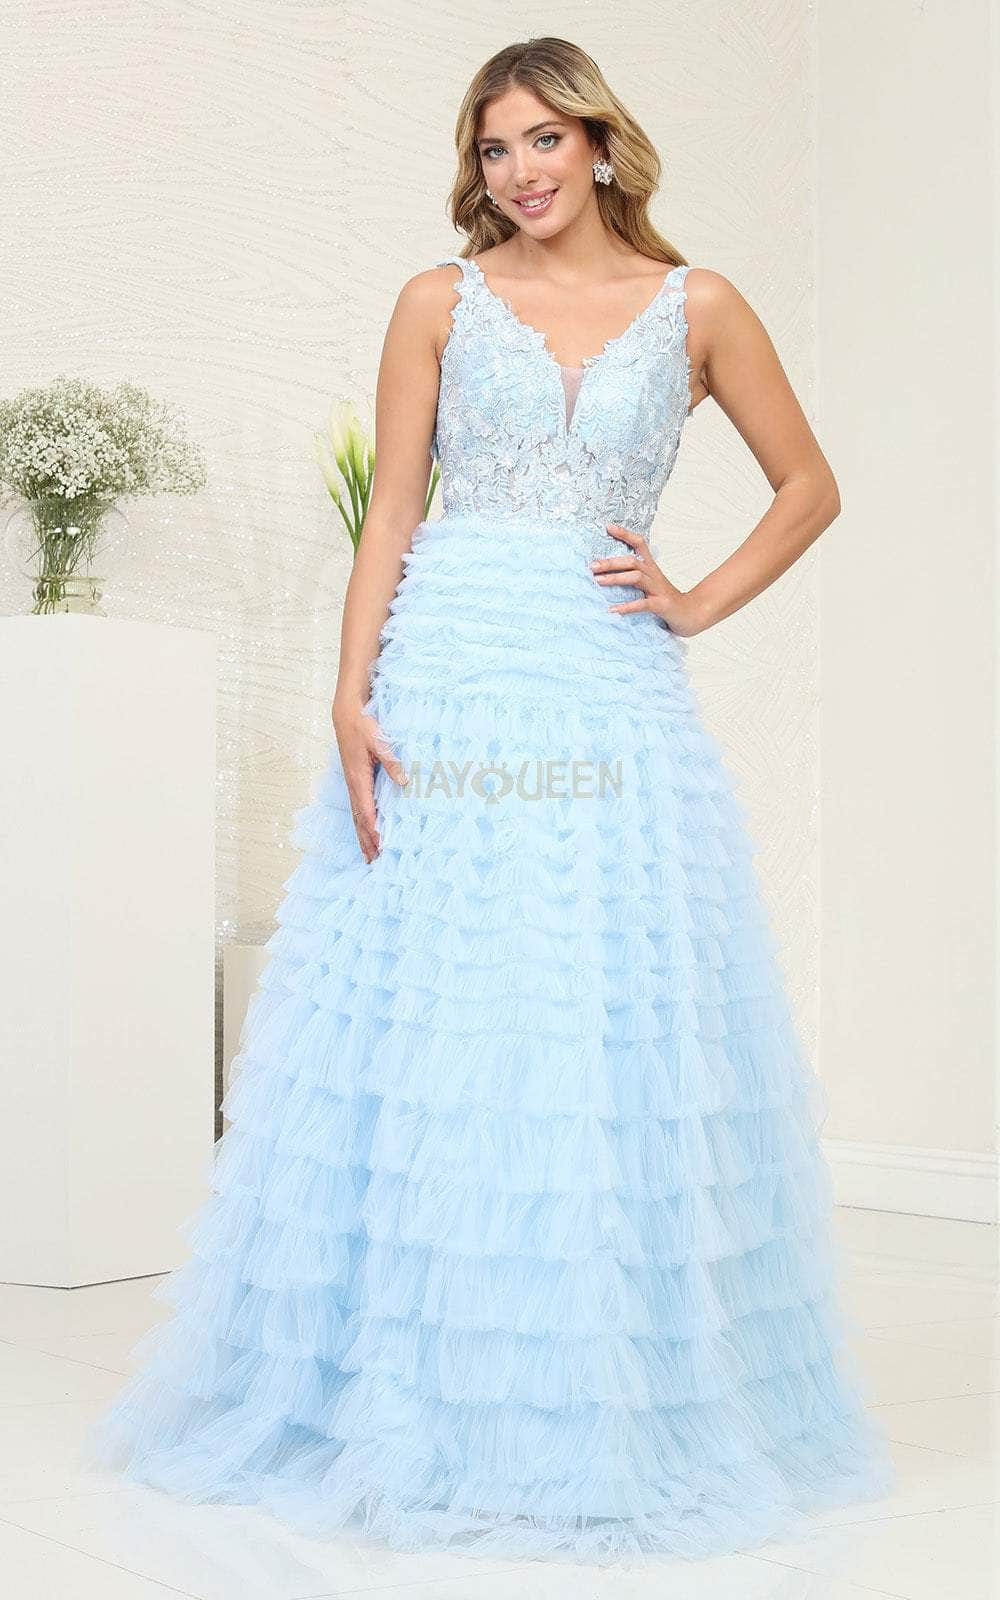 May Queen RQ8123 - Tiered A-Line Prom Dress
